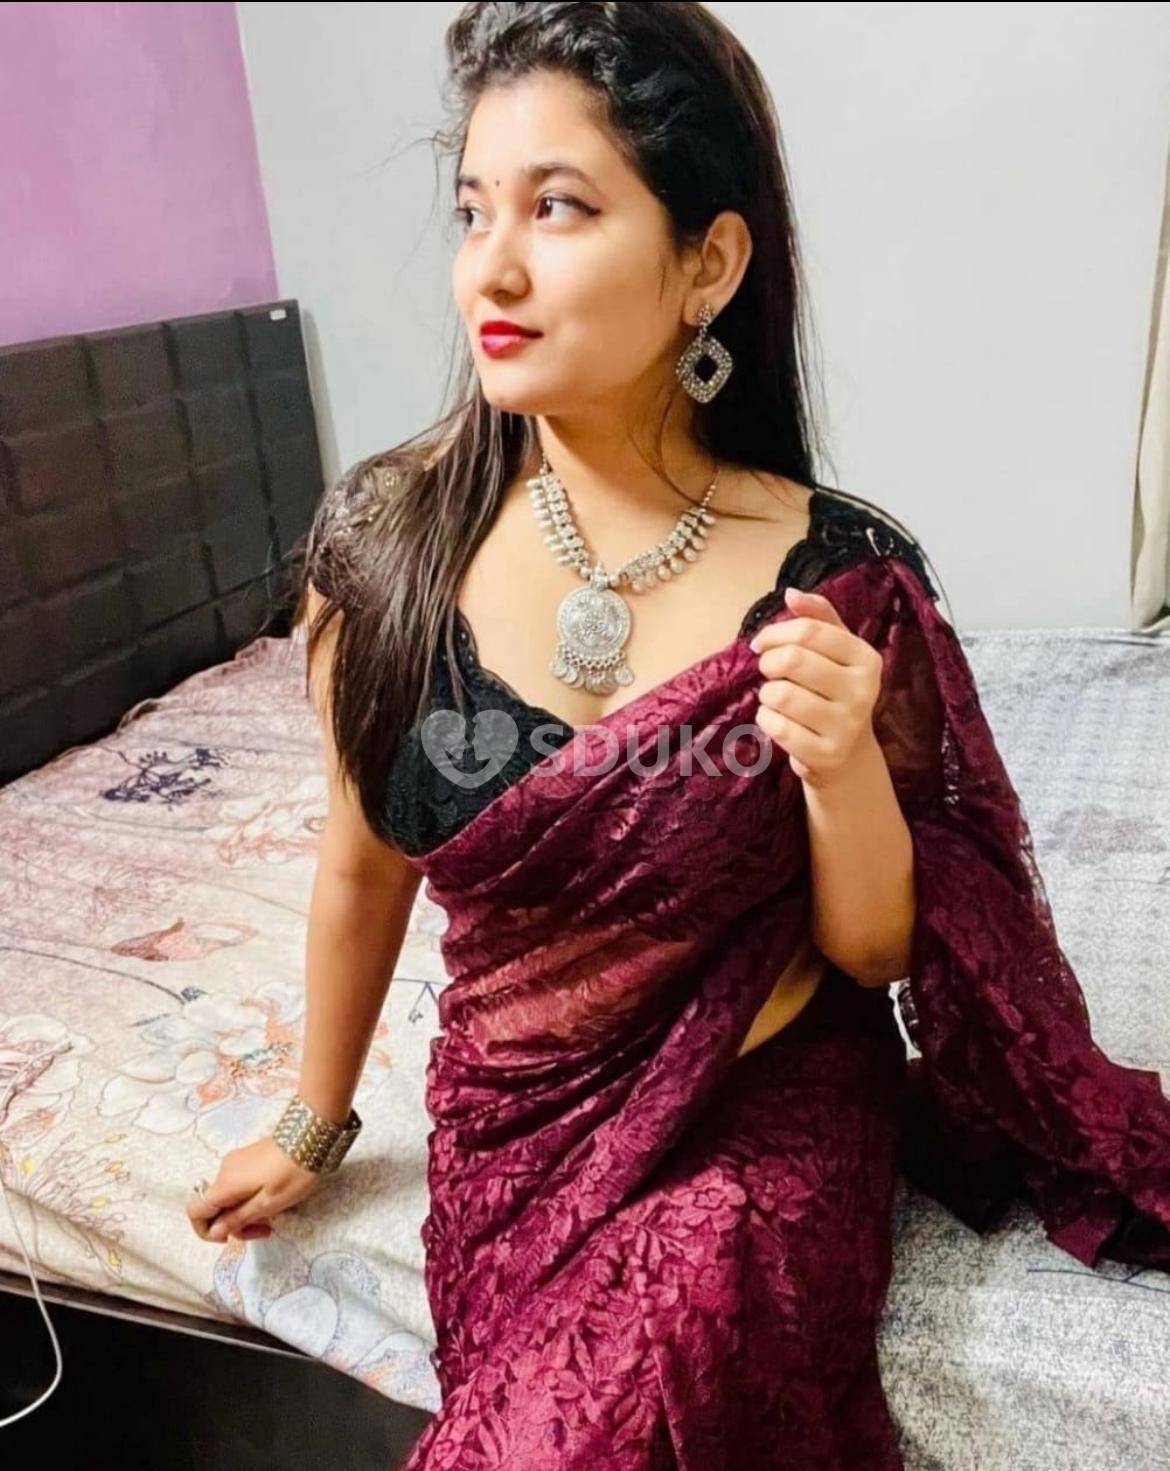 PANCHKULA AVAILABLE 100% SAFE AND SECURE TODAY LOW PRICE UNLIMITED ENJOY HOT COLLEGE GIRL HOUSEWIFE AUNTIES AVAILABLE AL